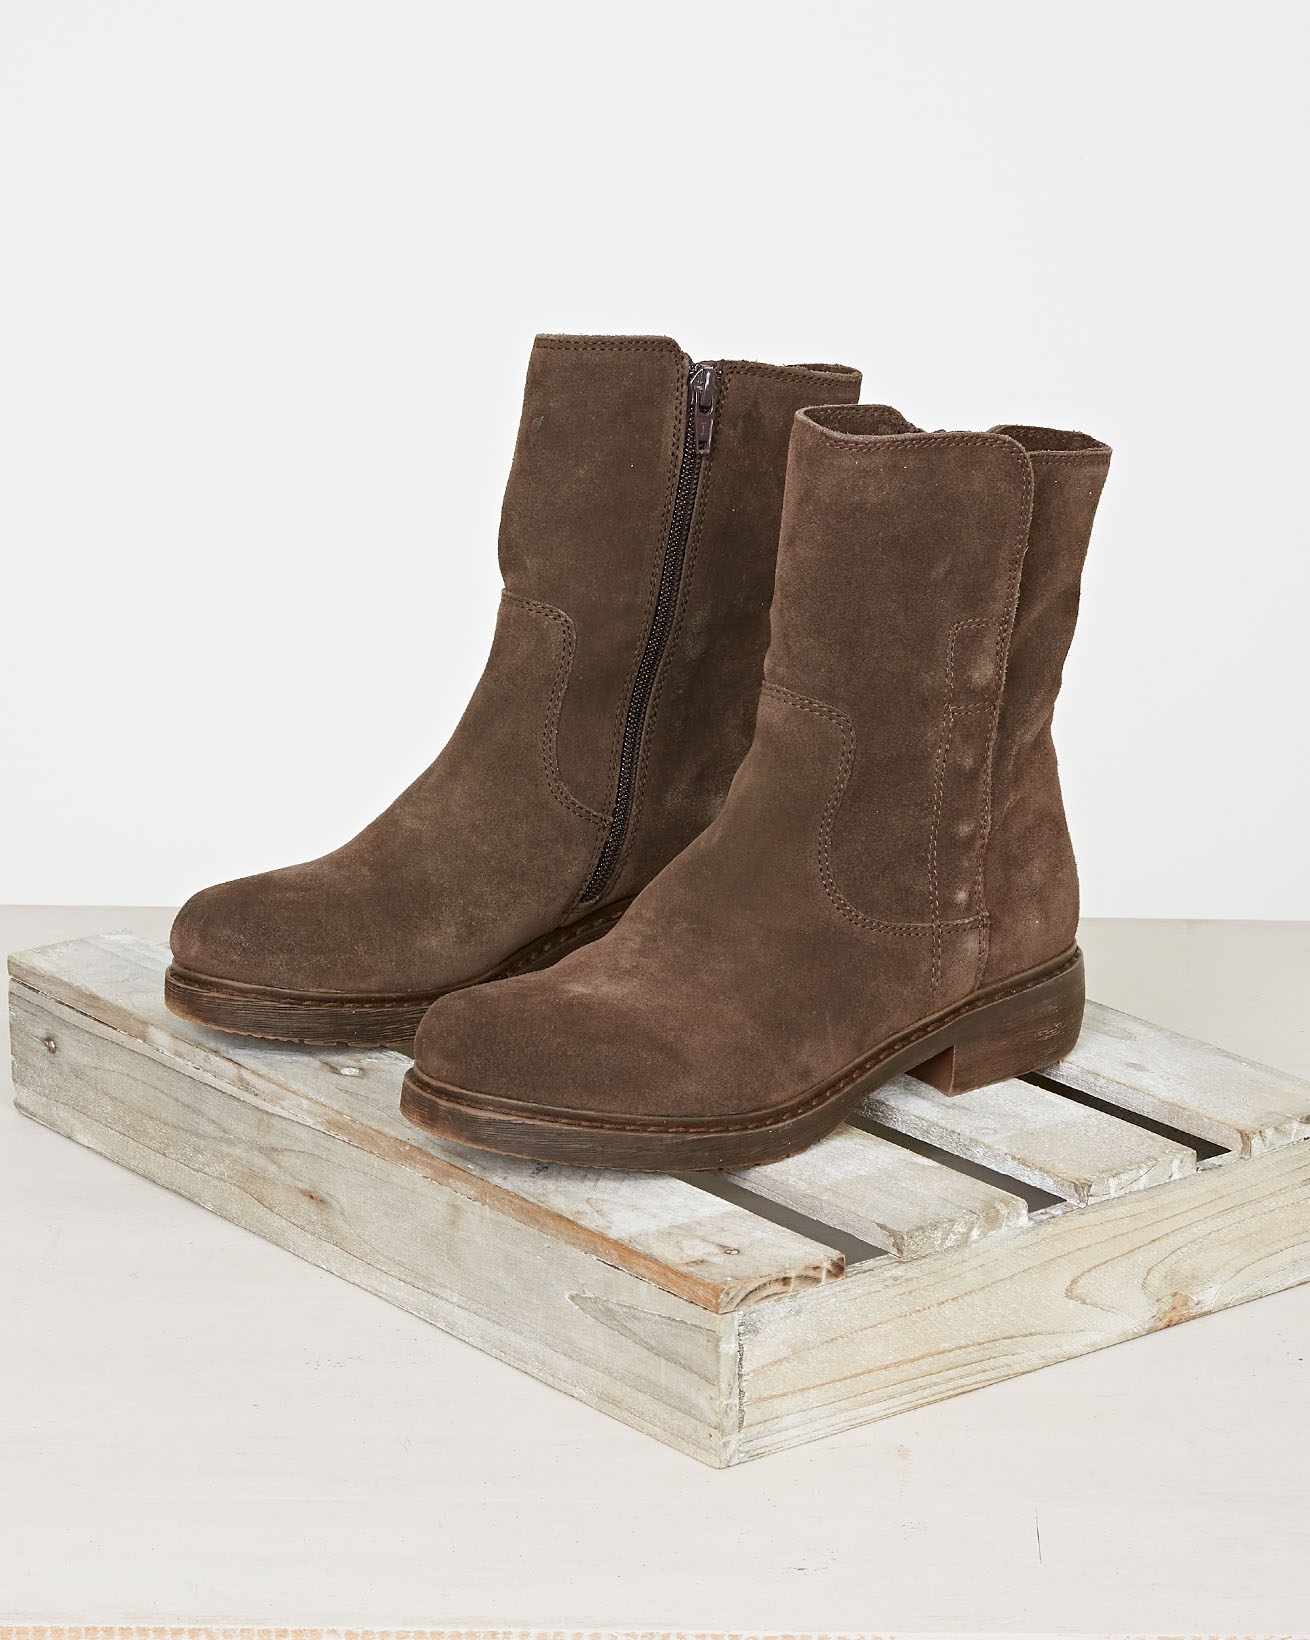 Essential Leather Ankle Boot / 36 / Chocolate